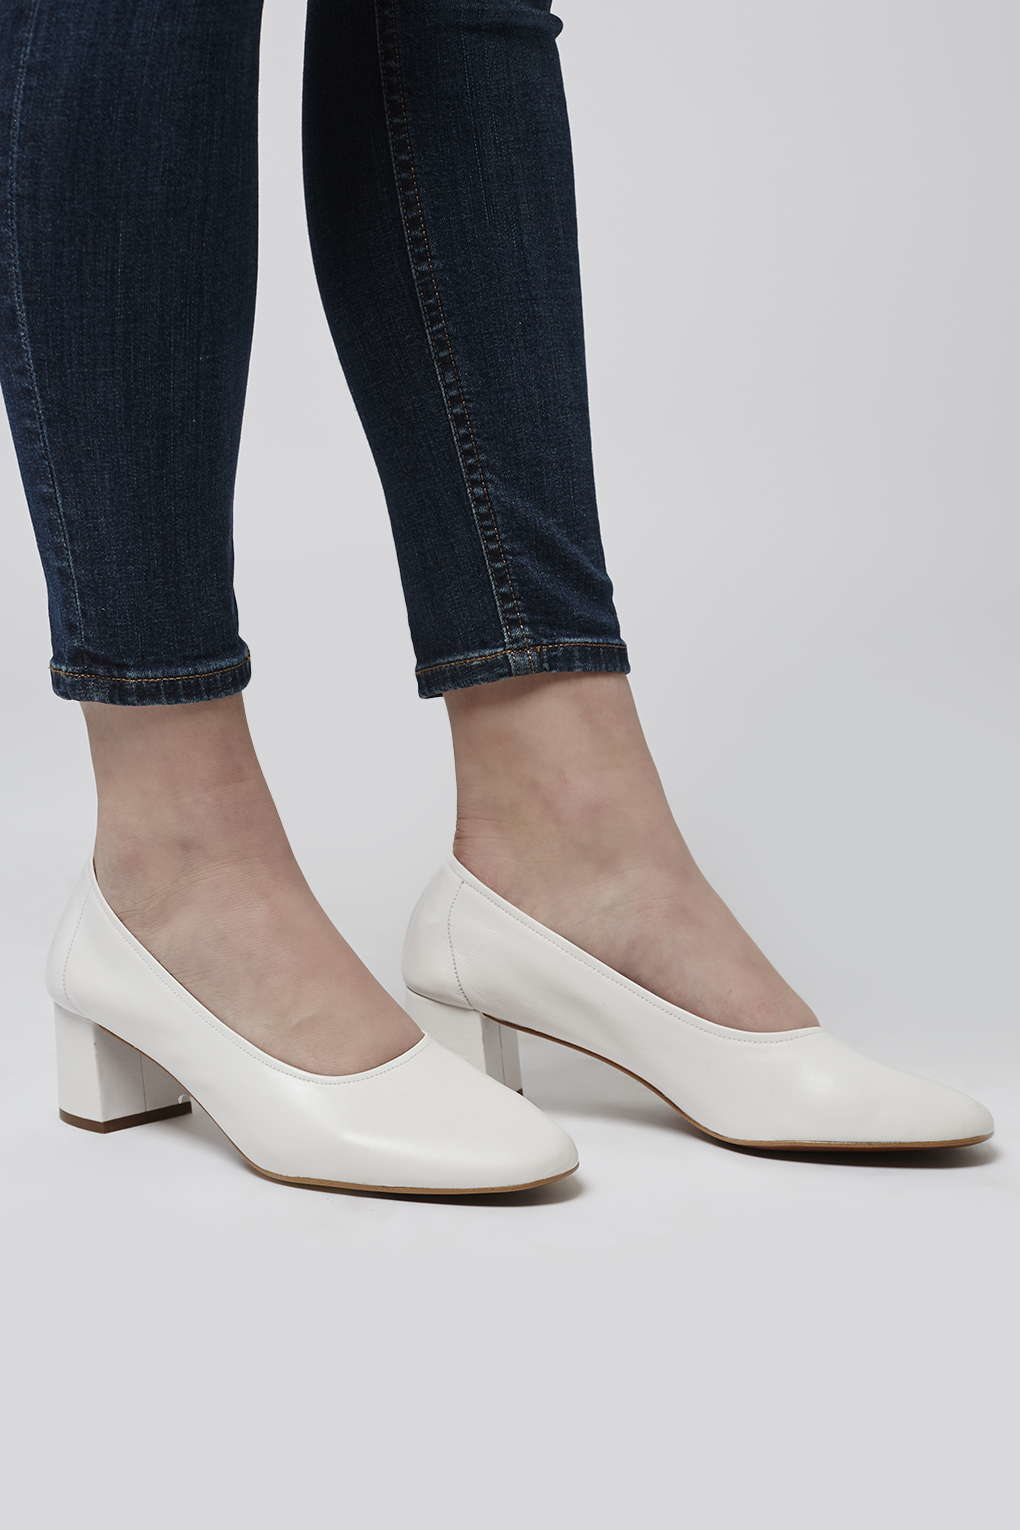 TOPSHOP Juno Soft Glove Mid Shoes in 